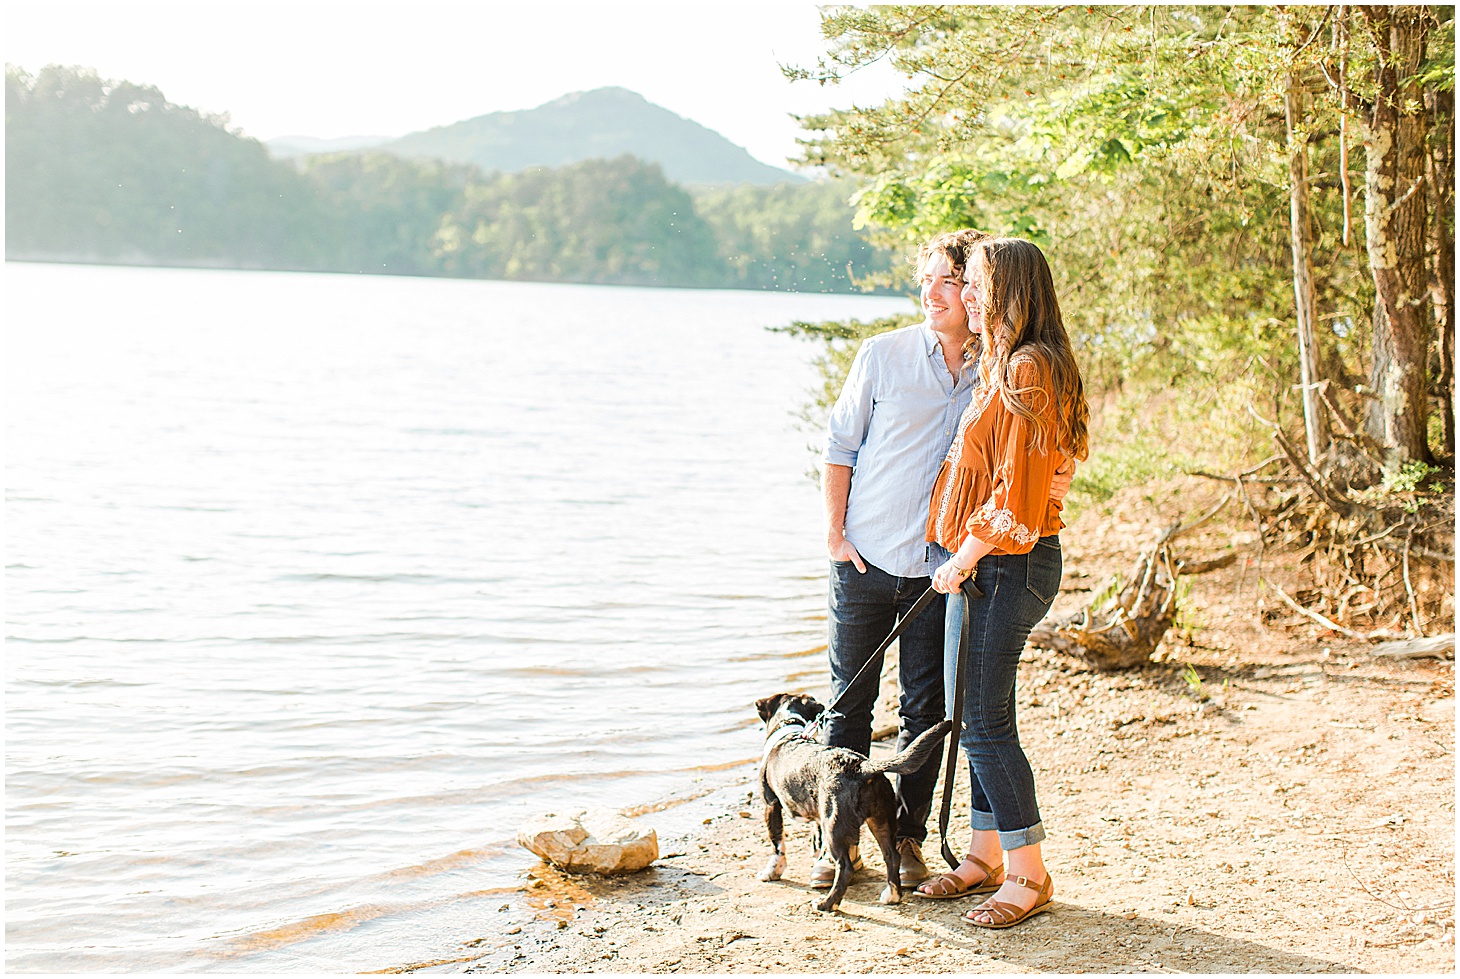 carvinscoveengagementsession_roanokeengagementsession_carvinscove_virginiawedding_virginiaweddingphotographer_vaweddingphotographer_photo_0007.jpg